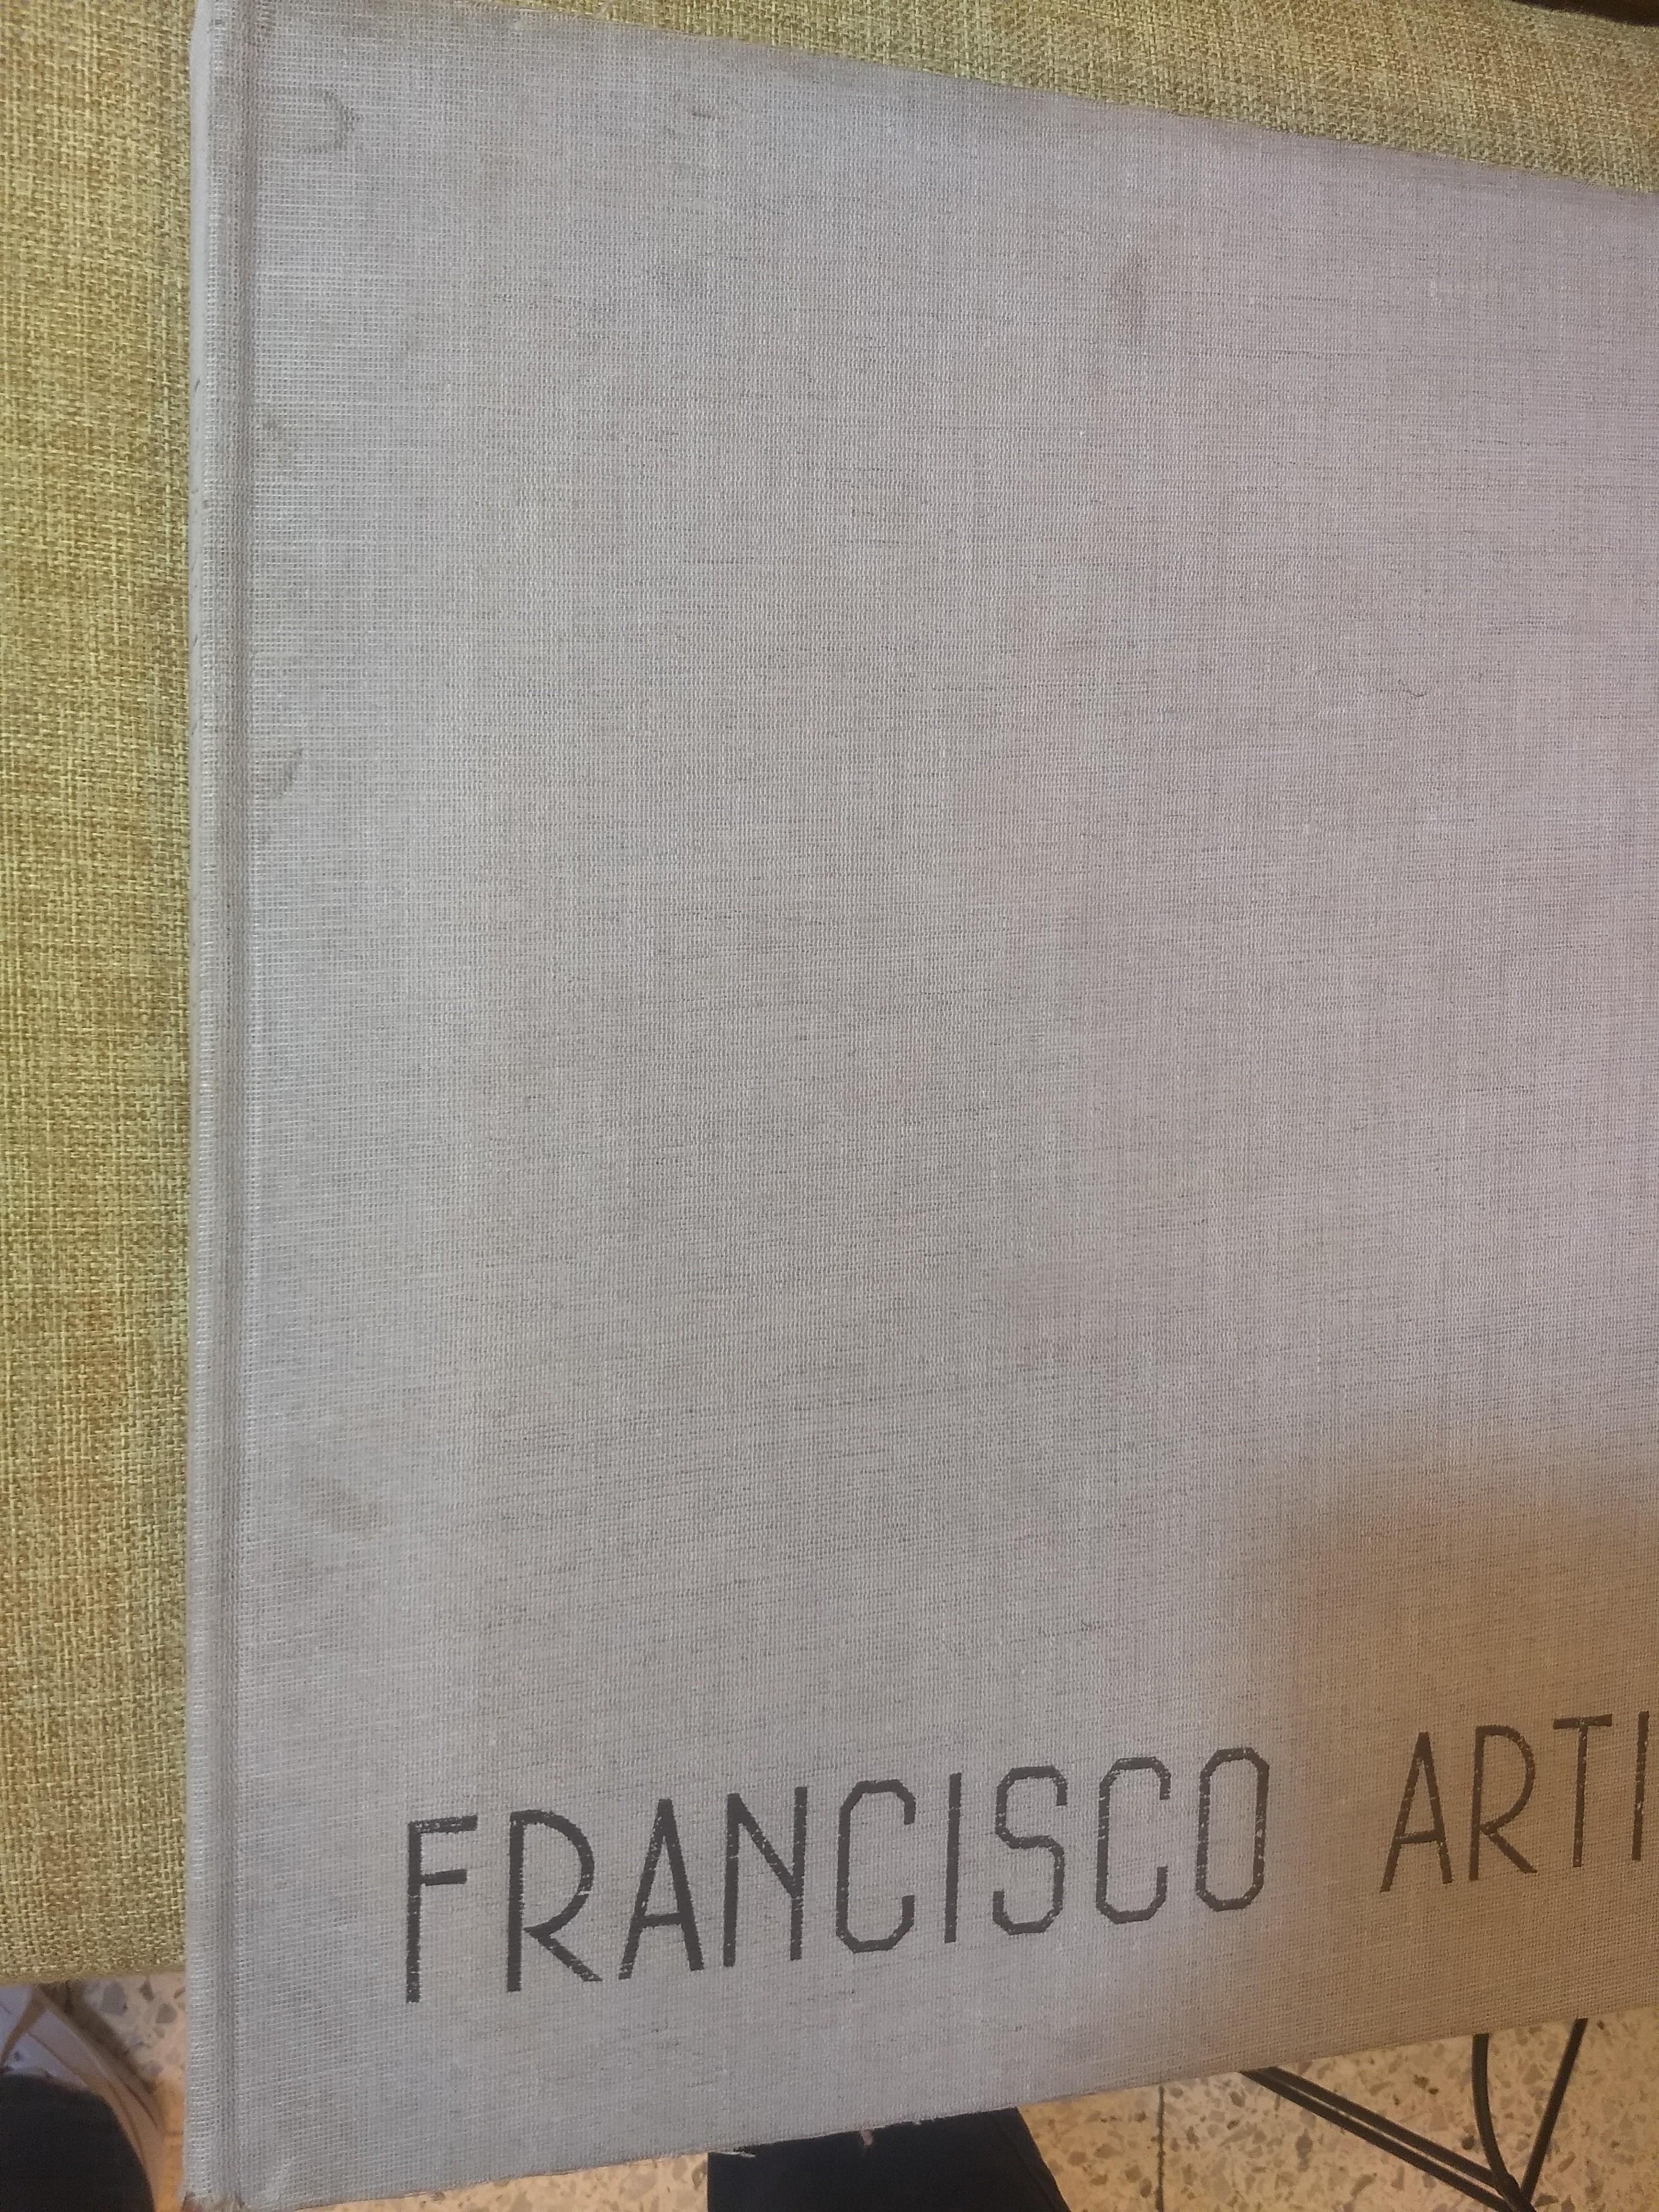 Francisco Artigas, Amazing Large Format Book on Mexican Modern Architecture For Sale 1